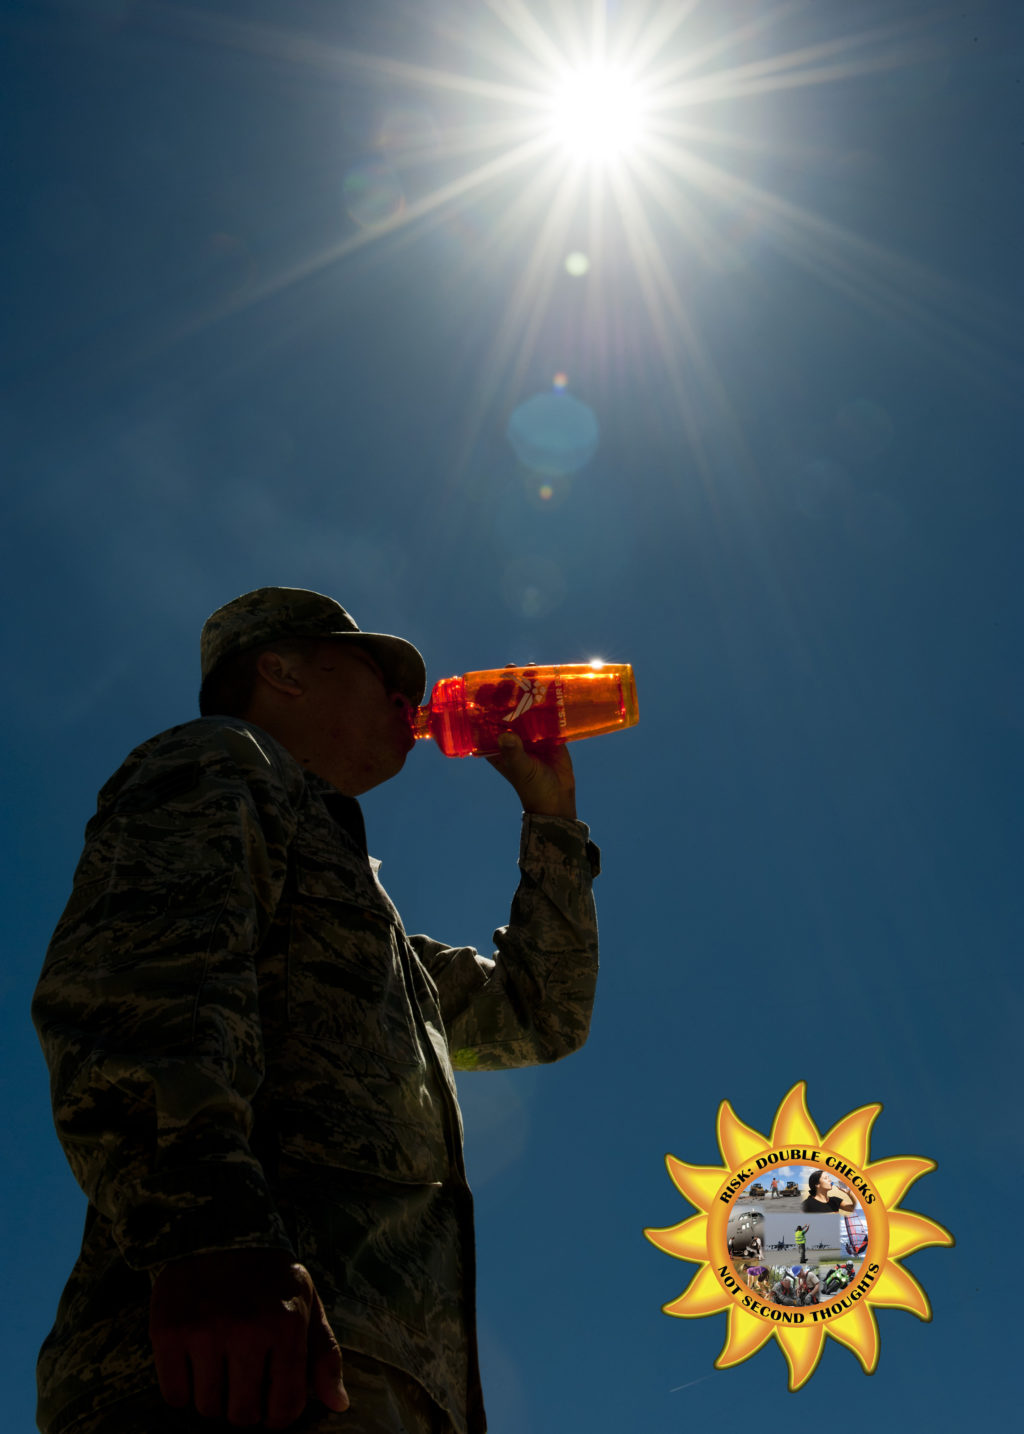 An image of a man drinking water under the sun